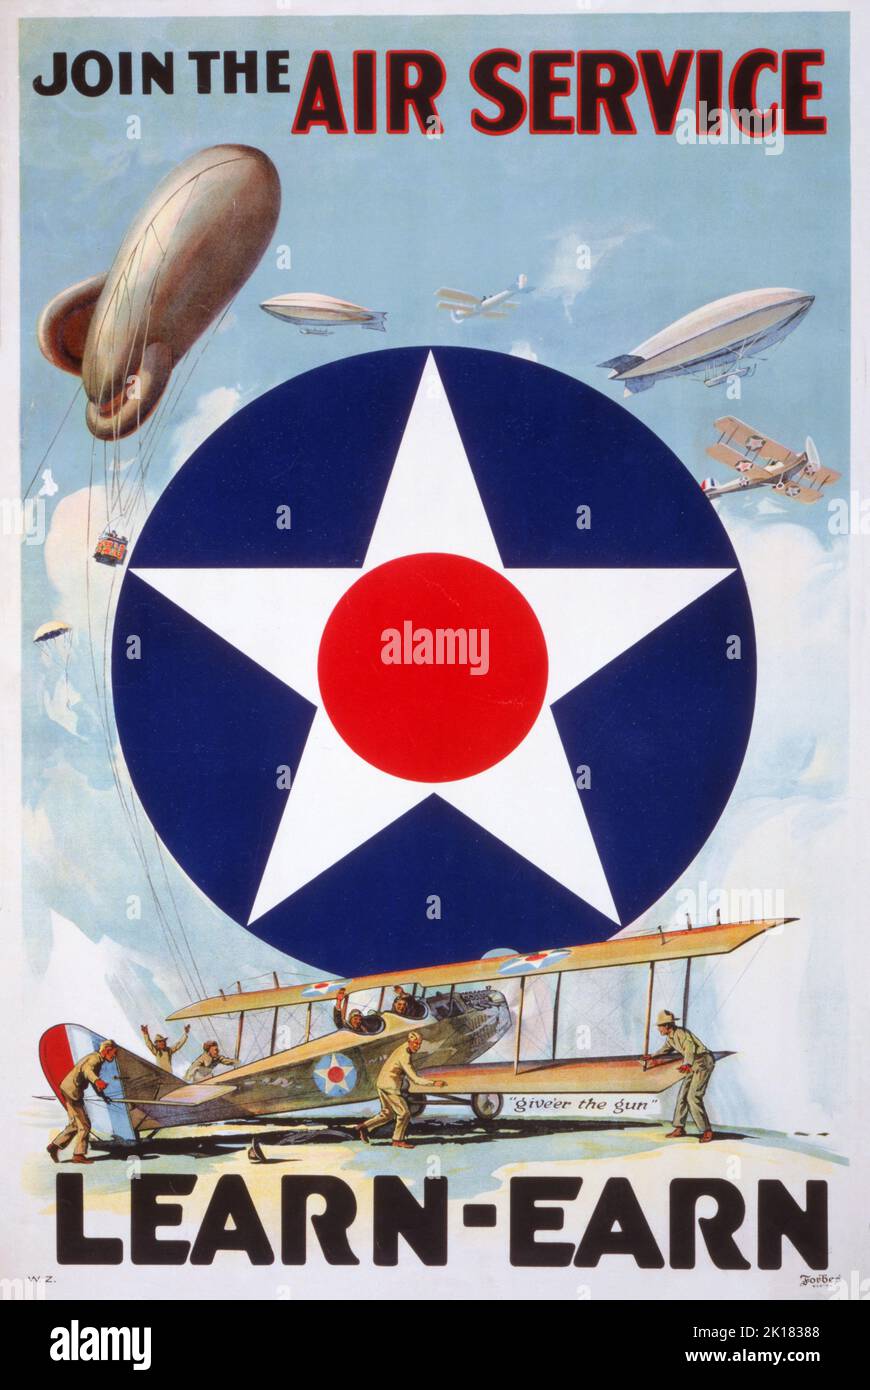 A recruitment poster for the United States Army Air Service AKA the 'Air Service', the aerial warfare service component of the United States Army between 1918 and 1926 and a forerunner of the United States Air Force. Stock Photo